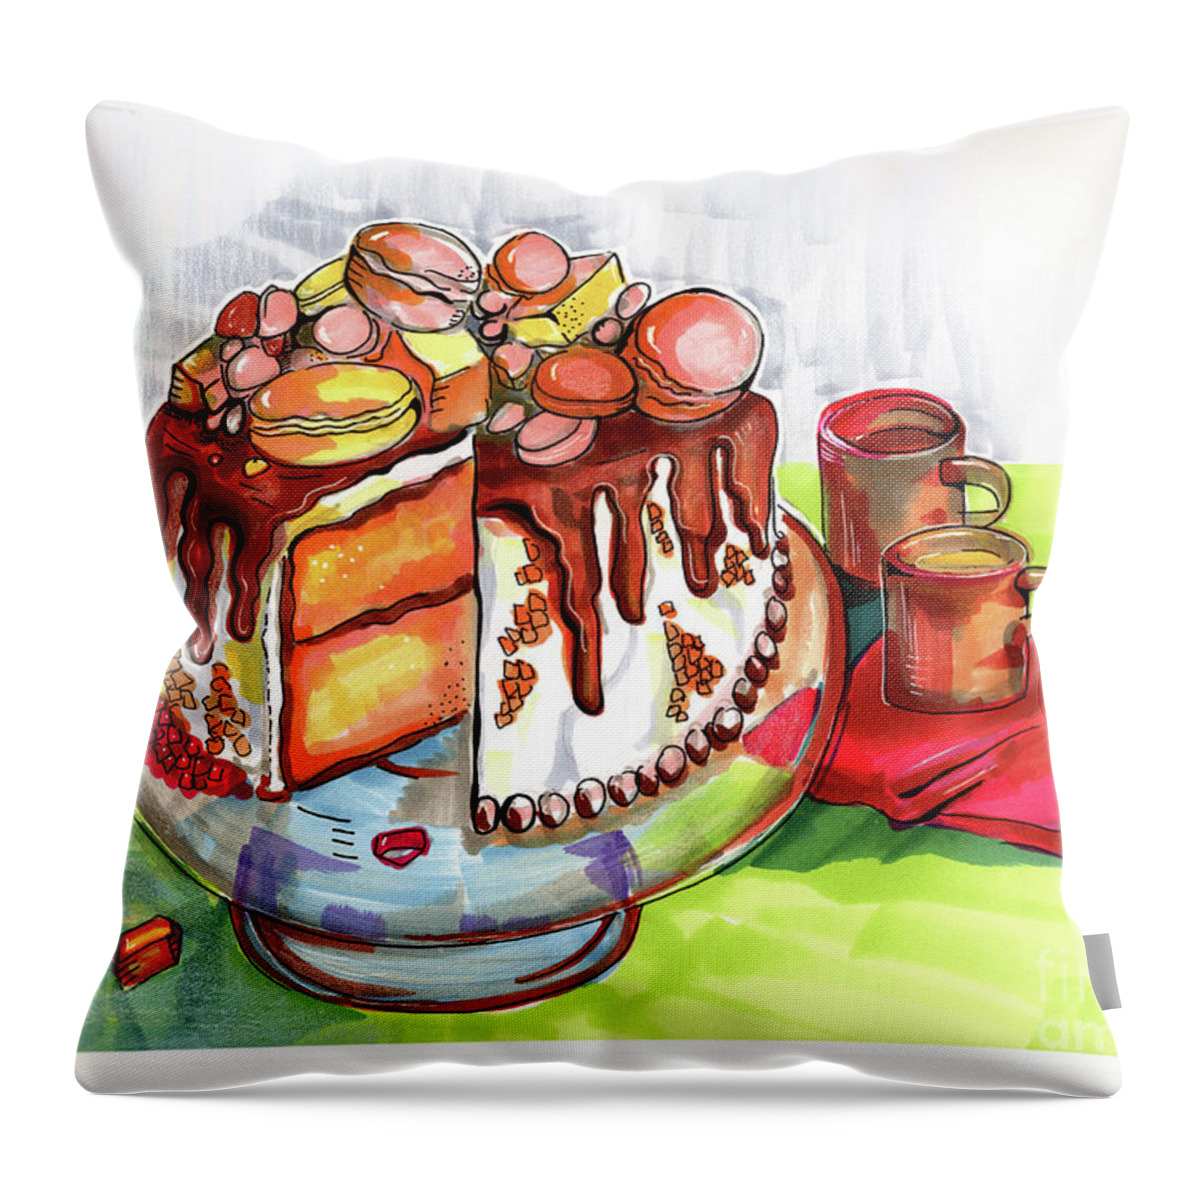 Dessert Throw Pillow featuring the drawing Illustration Of Winter Party Cake by Ariadna De Raadt